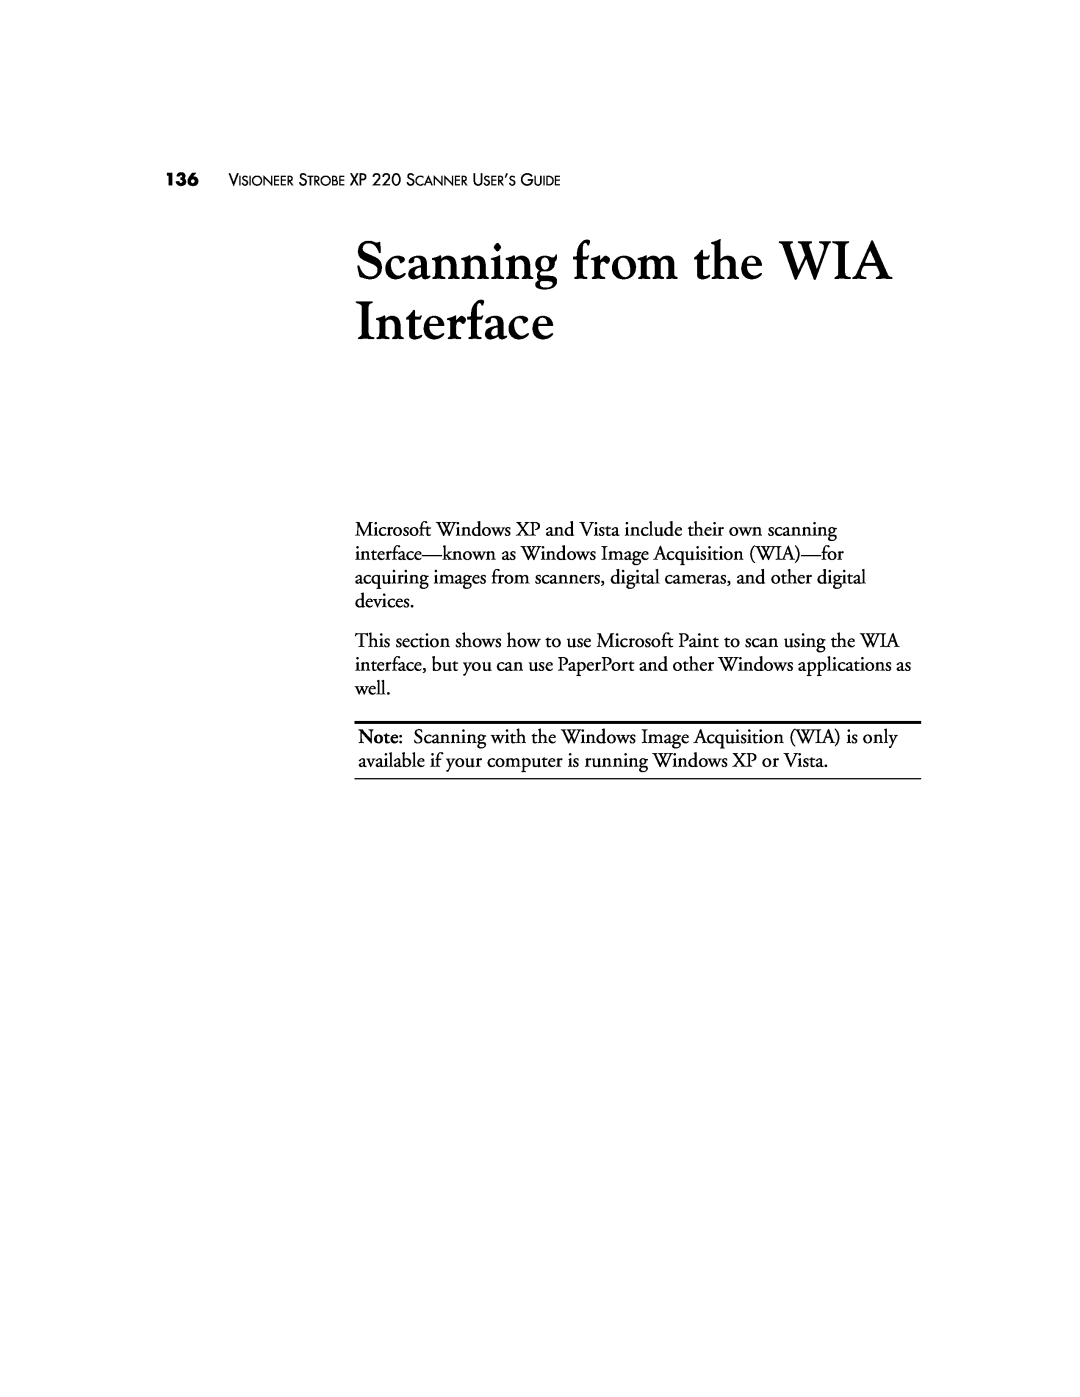 Visioneer XP220 manual Scanning from the WIA Interface, VISIONEER STROBE XP 220 SCANNER USER’S GUIDE 